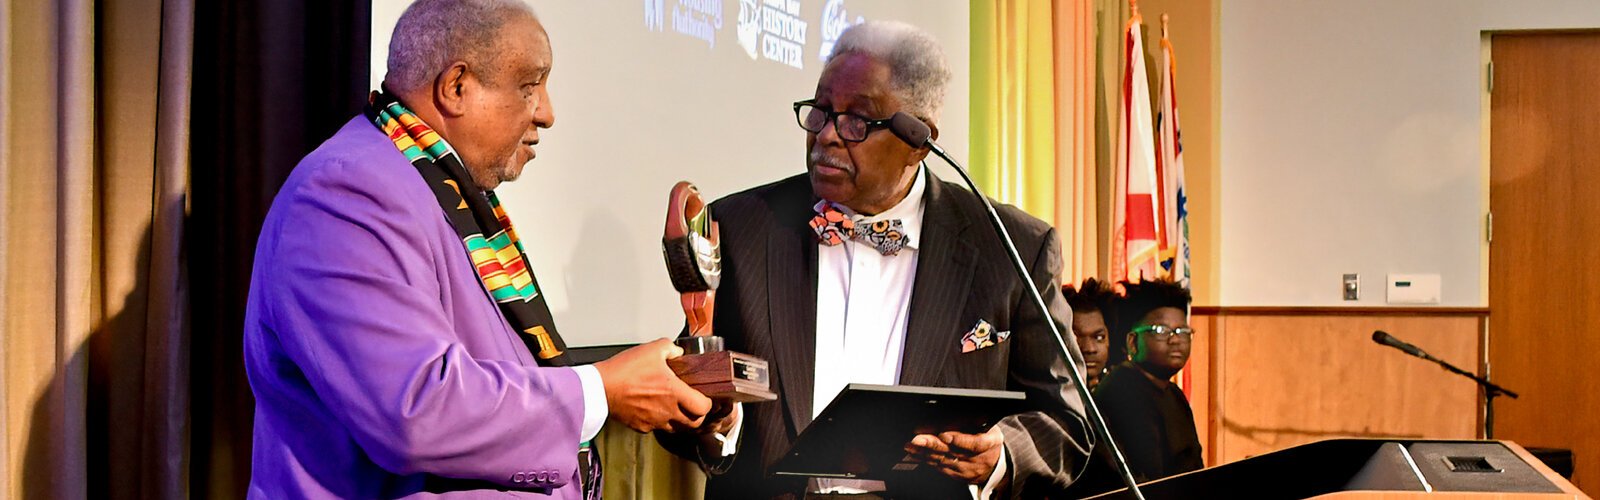 Dr. Bernard LaFayette Jr. presents the Dr. Bernard LaFayette Award for the Preservation of Black History and Heritage to Clarence Fort for his outstanding contribution to the Civil Rights Movement.